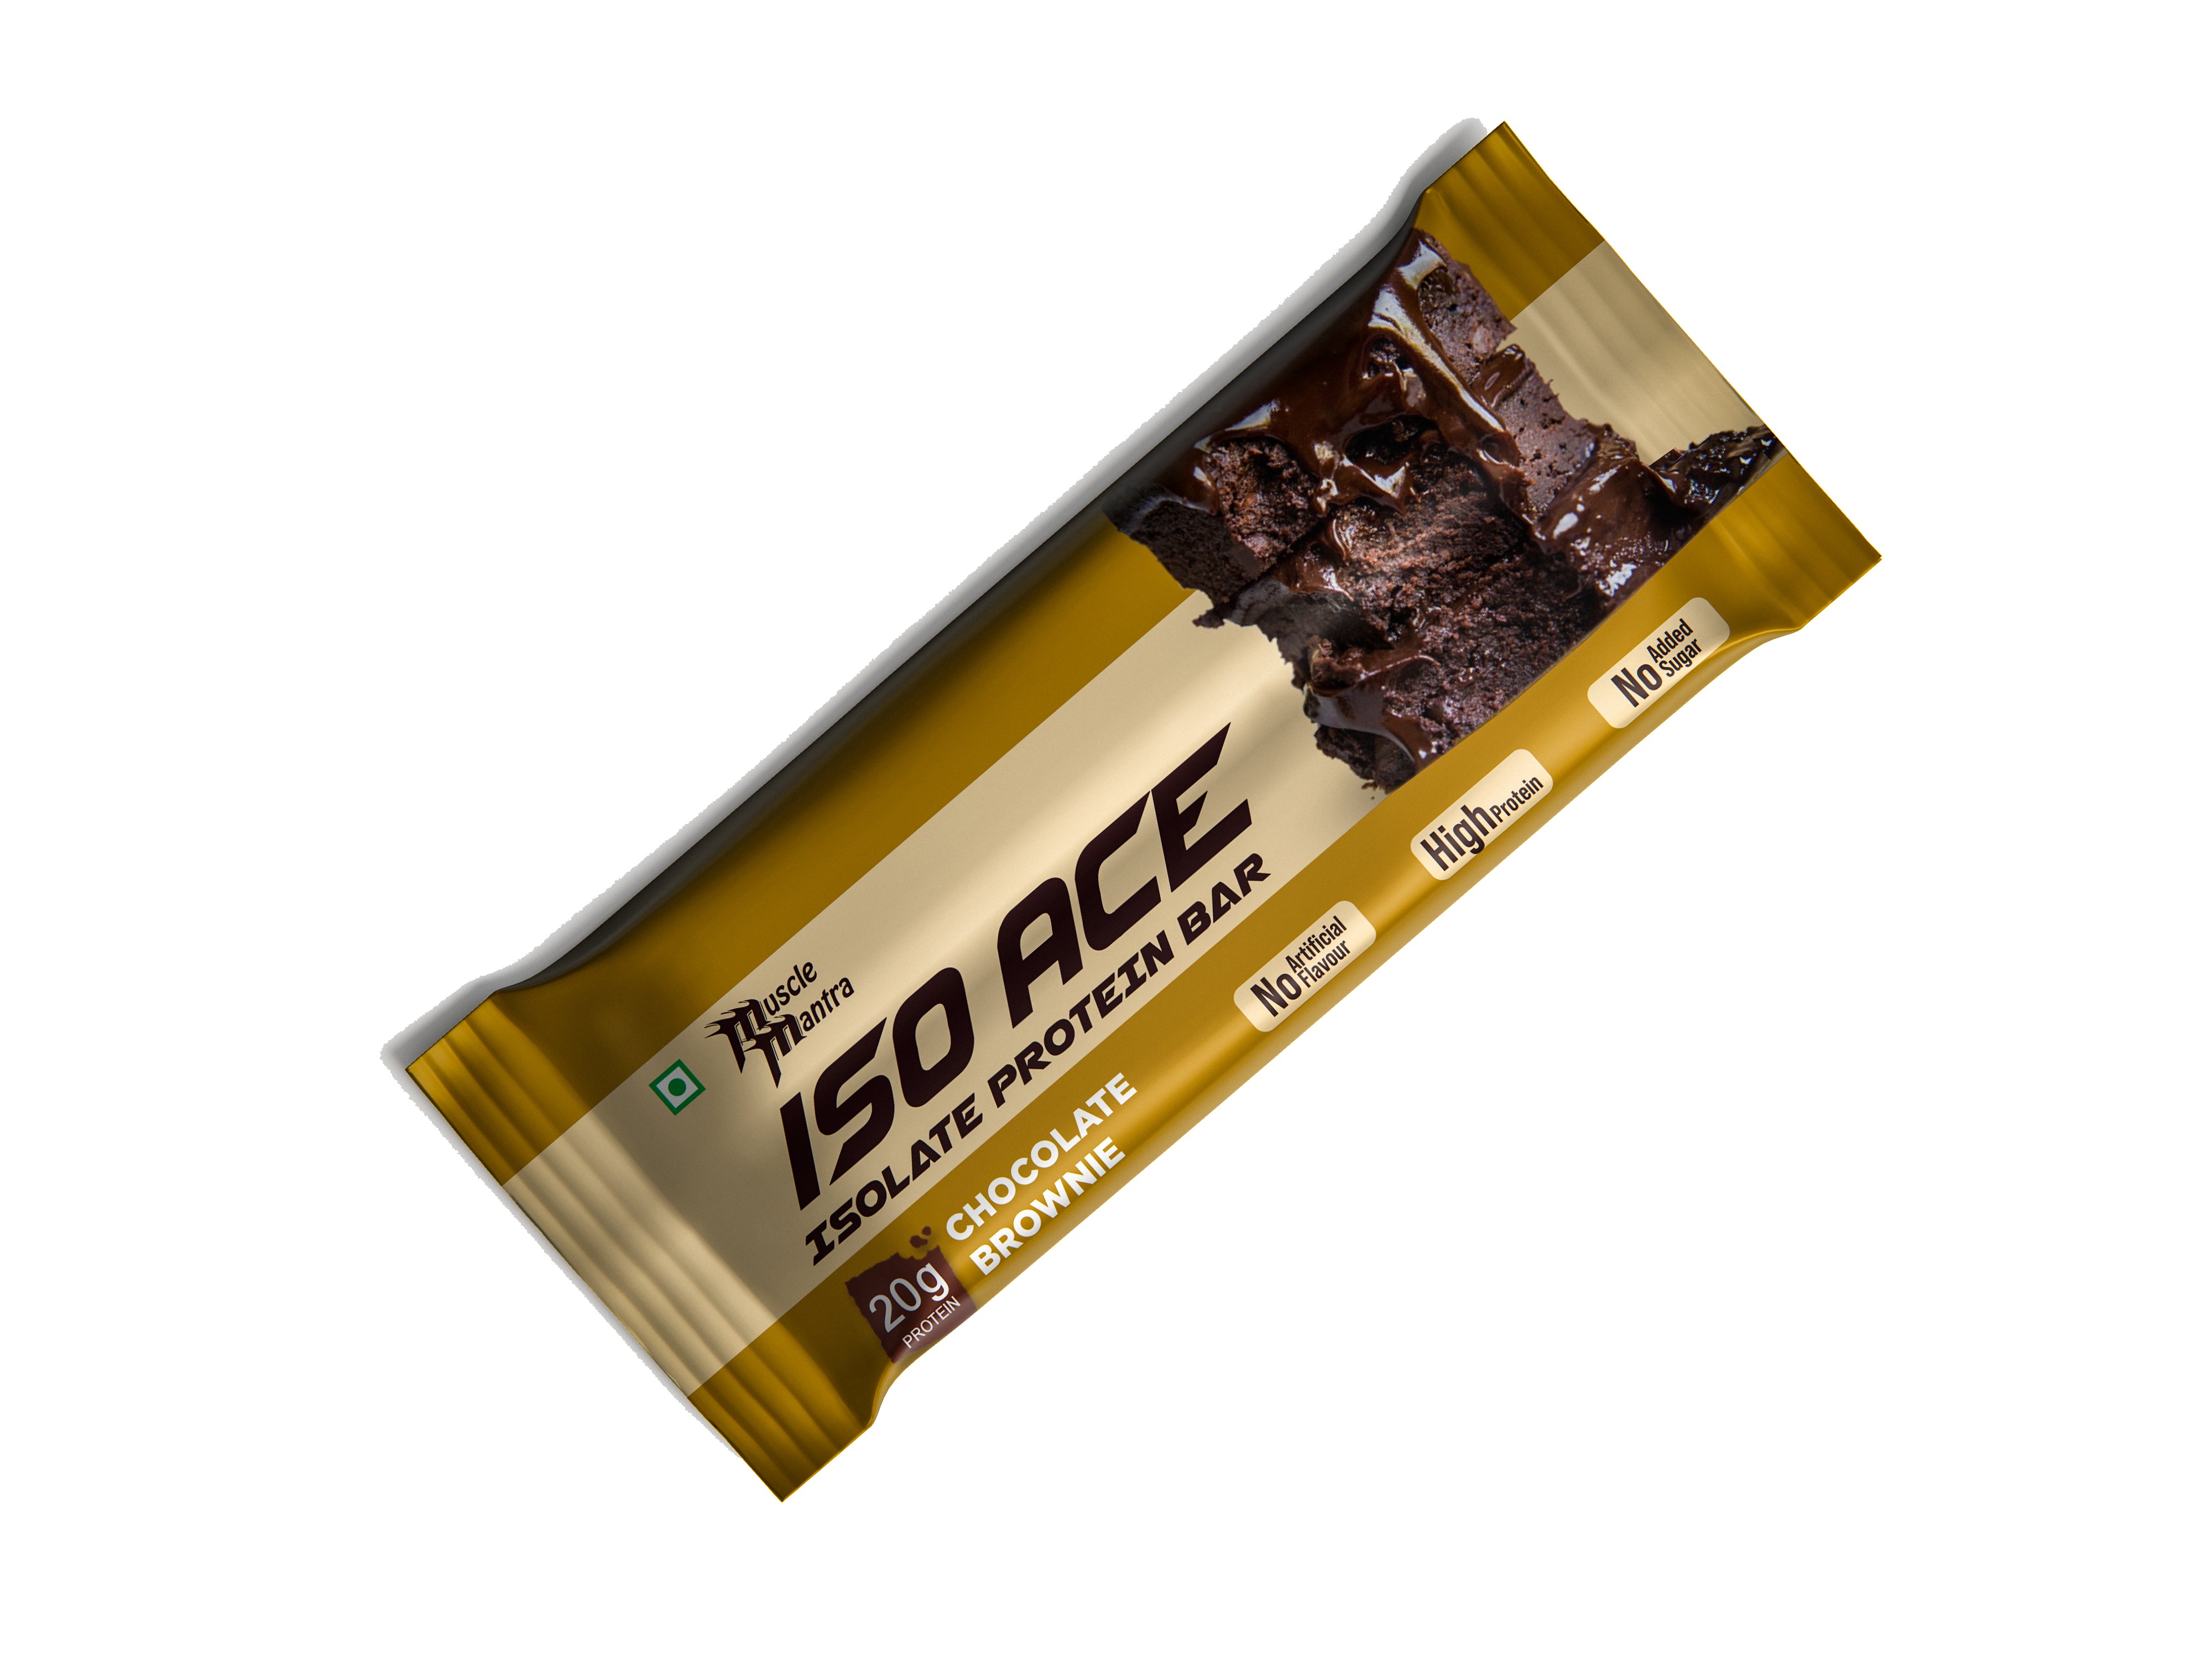 Muscle Mantra ISO ACE Isolate Protein Bar (Box of 6 bars)